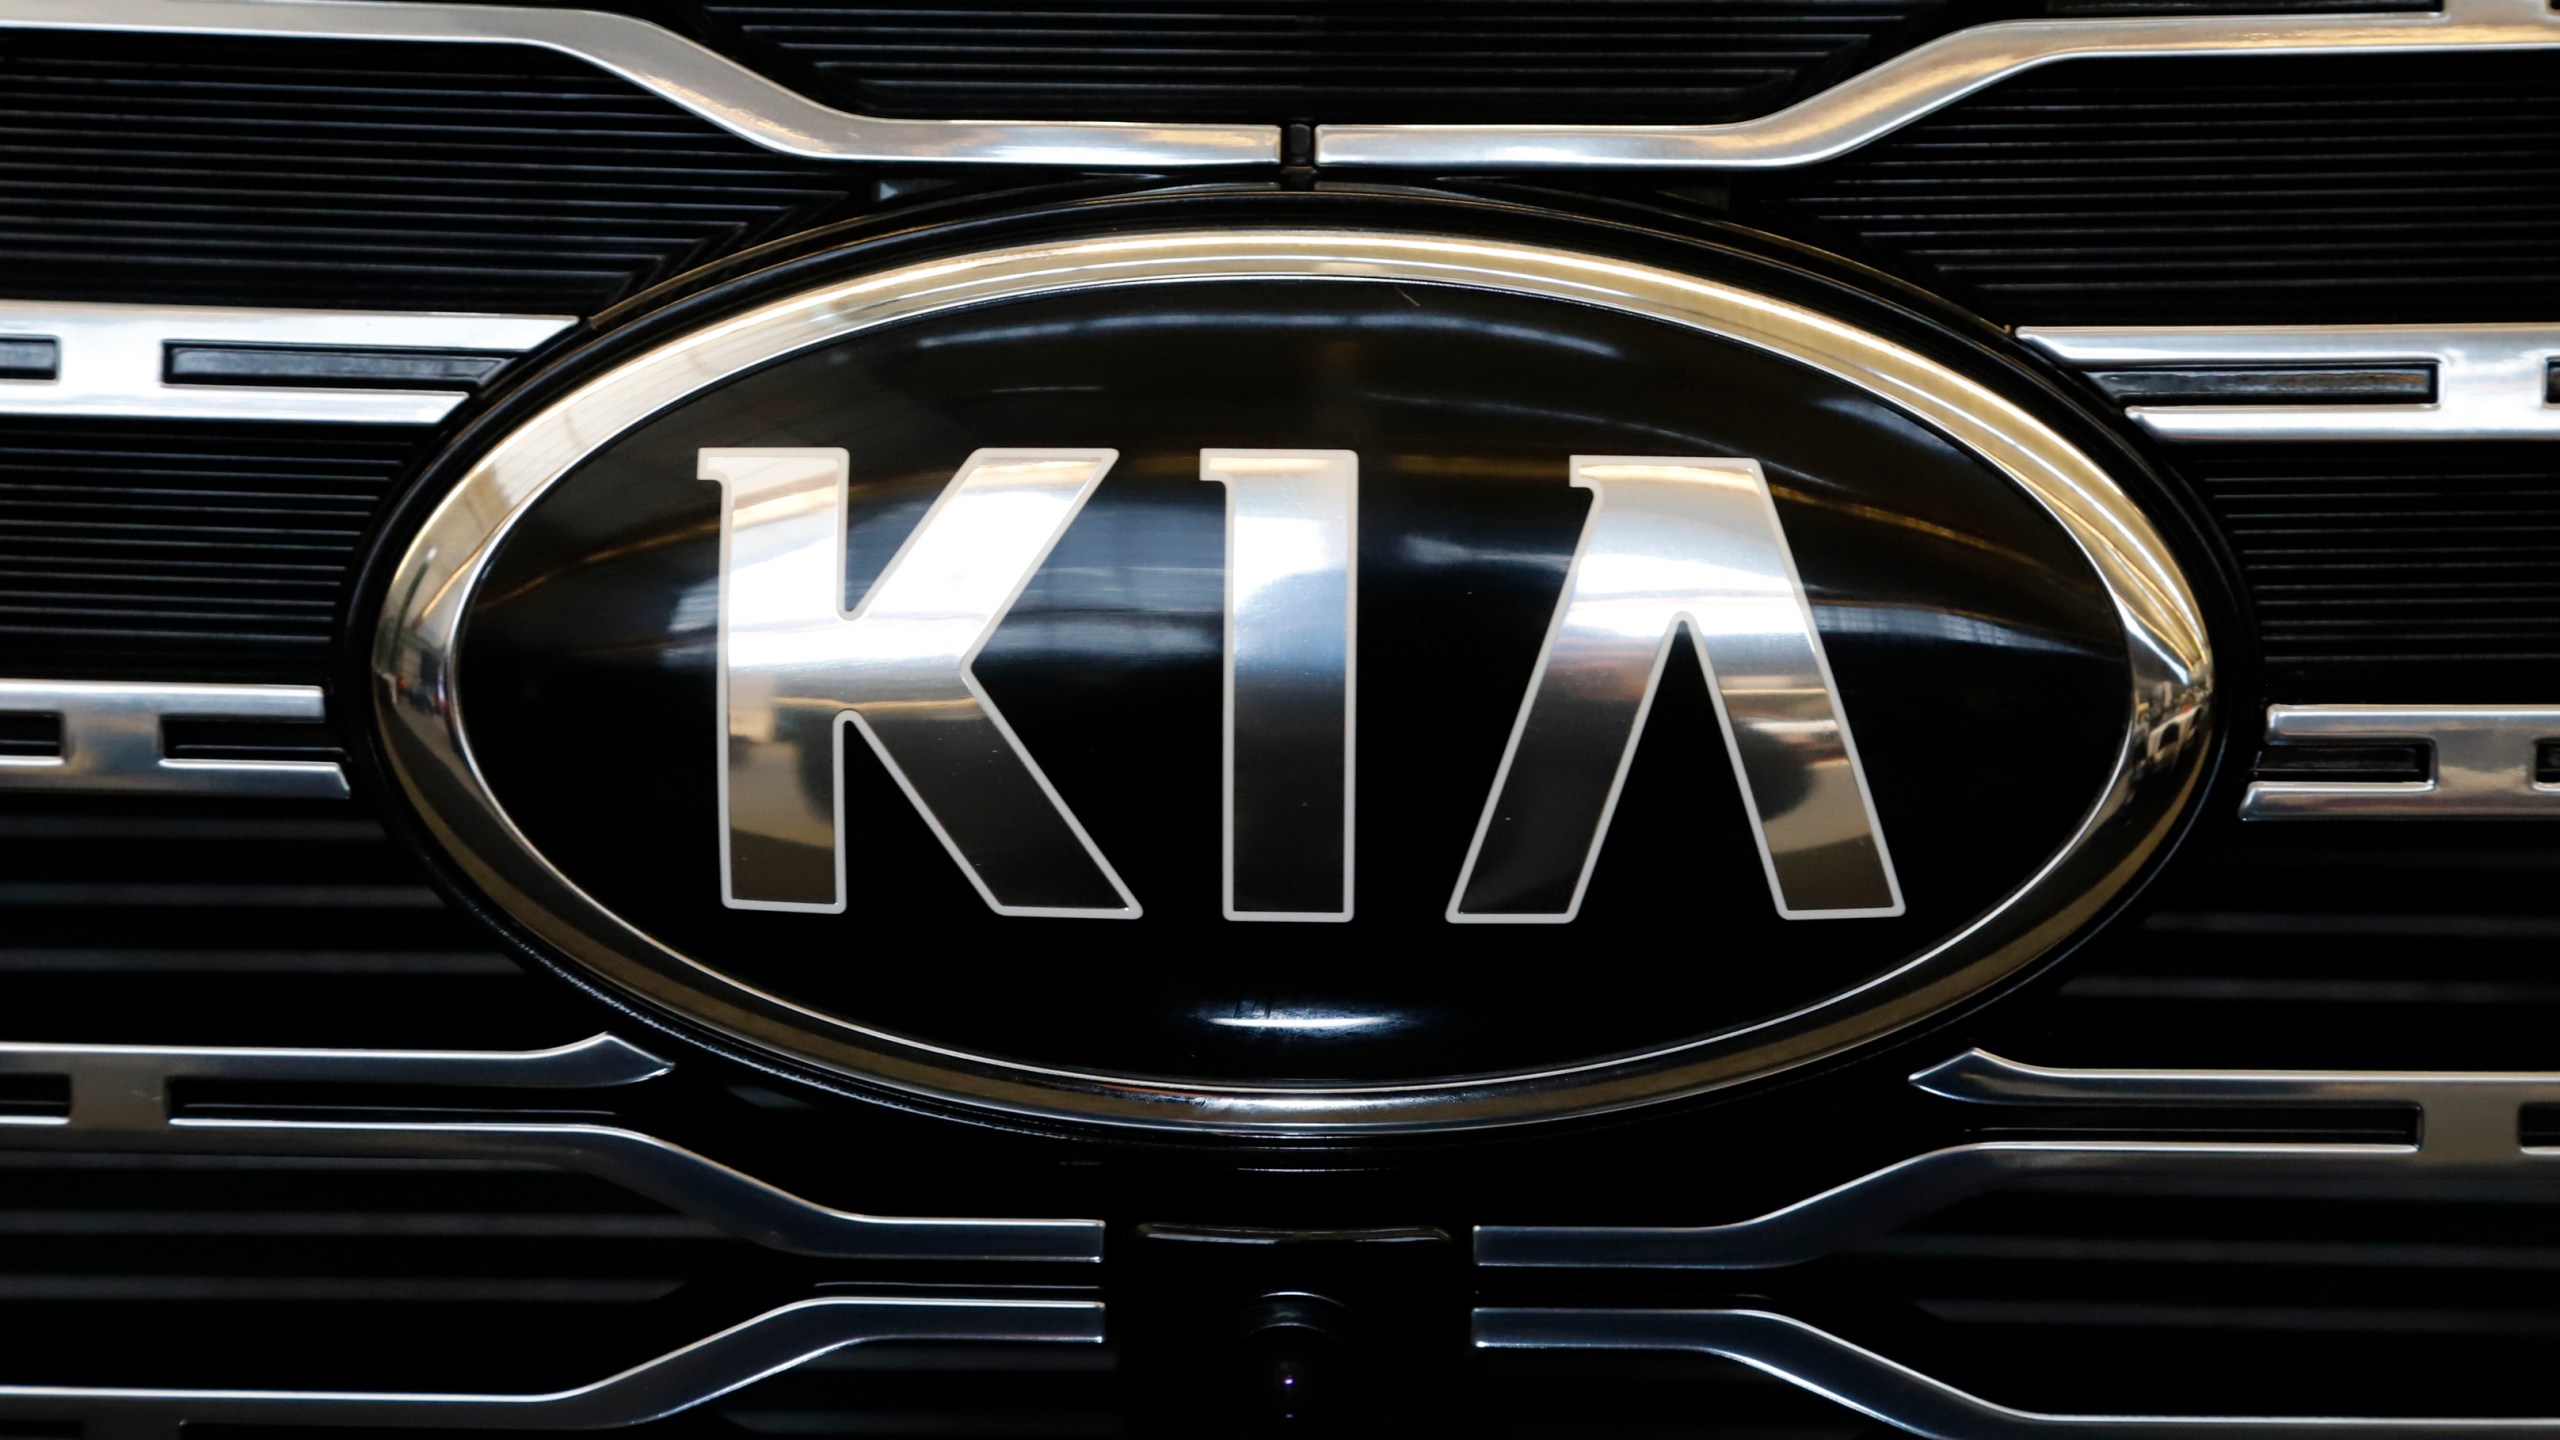 FILE - This is the front grill of a 2020 KIA Telluride on display at the 2020 Pittsburgh International Auto Show, Feb.13, 2020 in Pittsburgh. Kia is recalling more than 427,000 of its Telluride SUVs due to a defect that may cause the cars to roll away while they’re parked. According to documents published by the National Highway Traffic Safety Administration, the intermediate shaft and right front driveshaft of certain 2020-2024 Tellurides may not be fully engaged. (AP Photo/Gene J. Puskar. file)